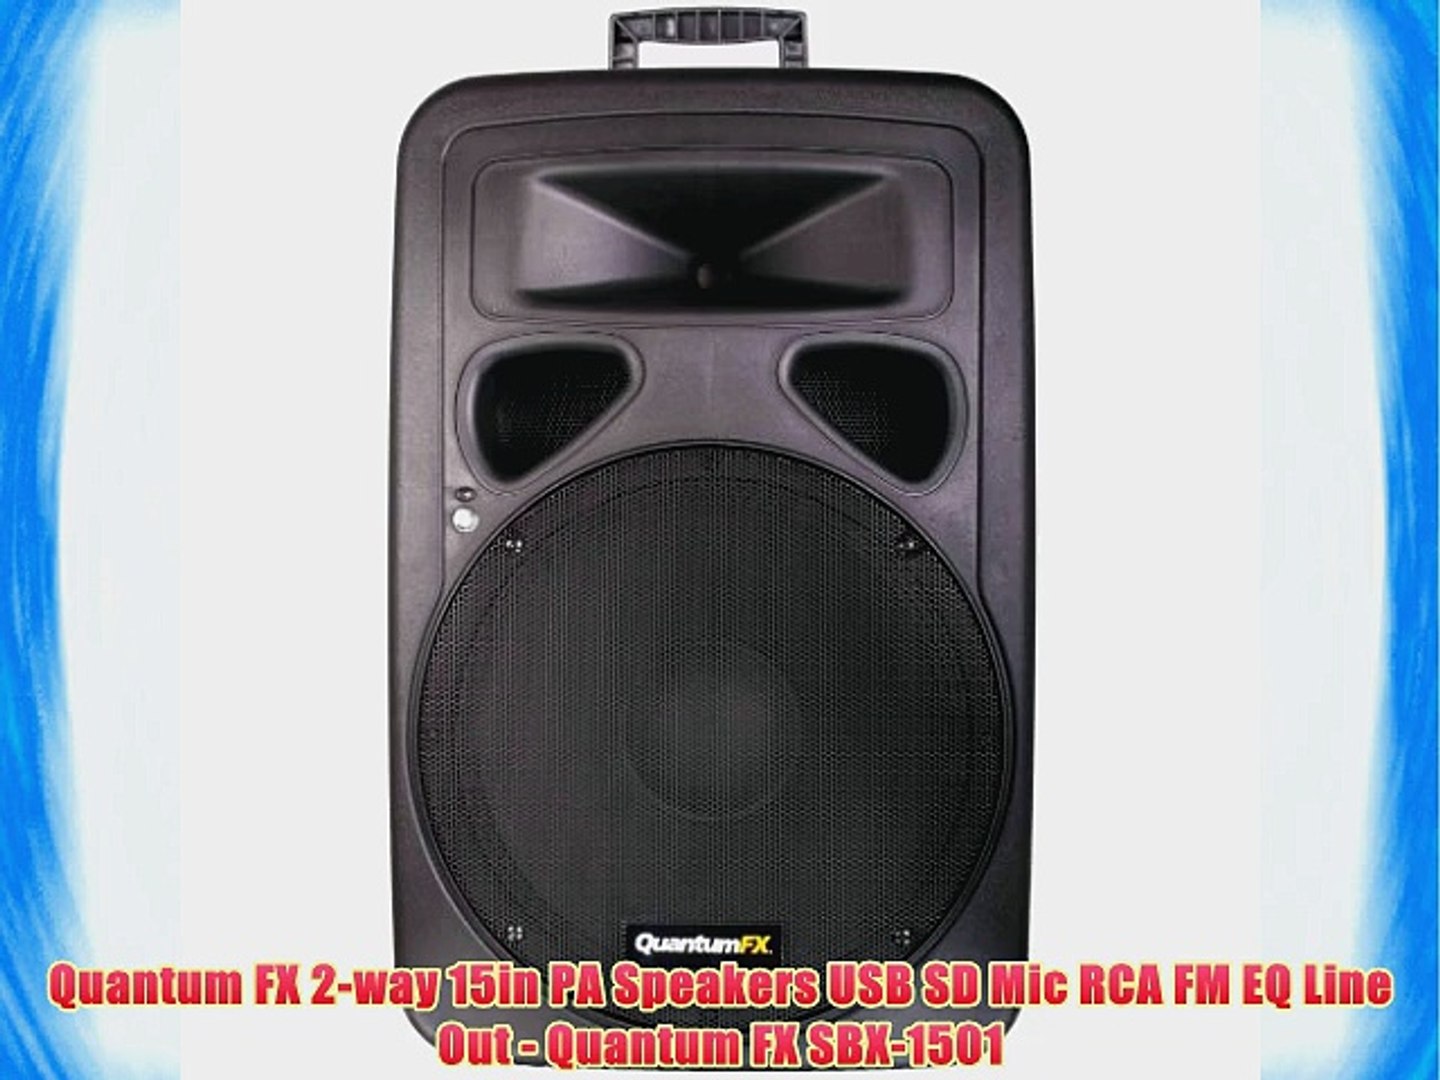 Quantum FX 2-way 15in PA Speakers USB SD Mic RCA FM EQ Line Out - Quantum  FX SBX-1501 - video Dailymotion